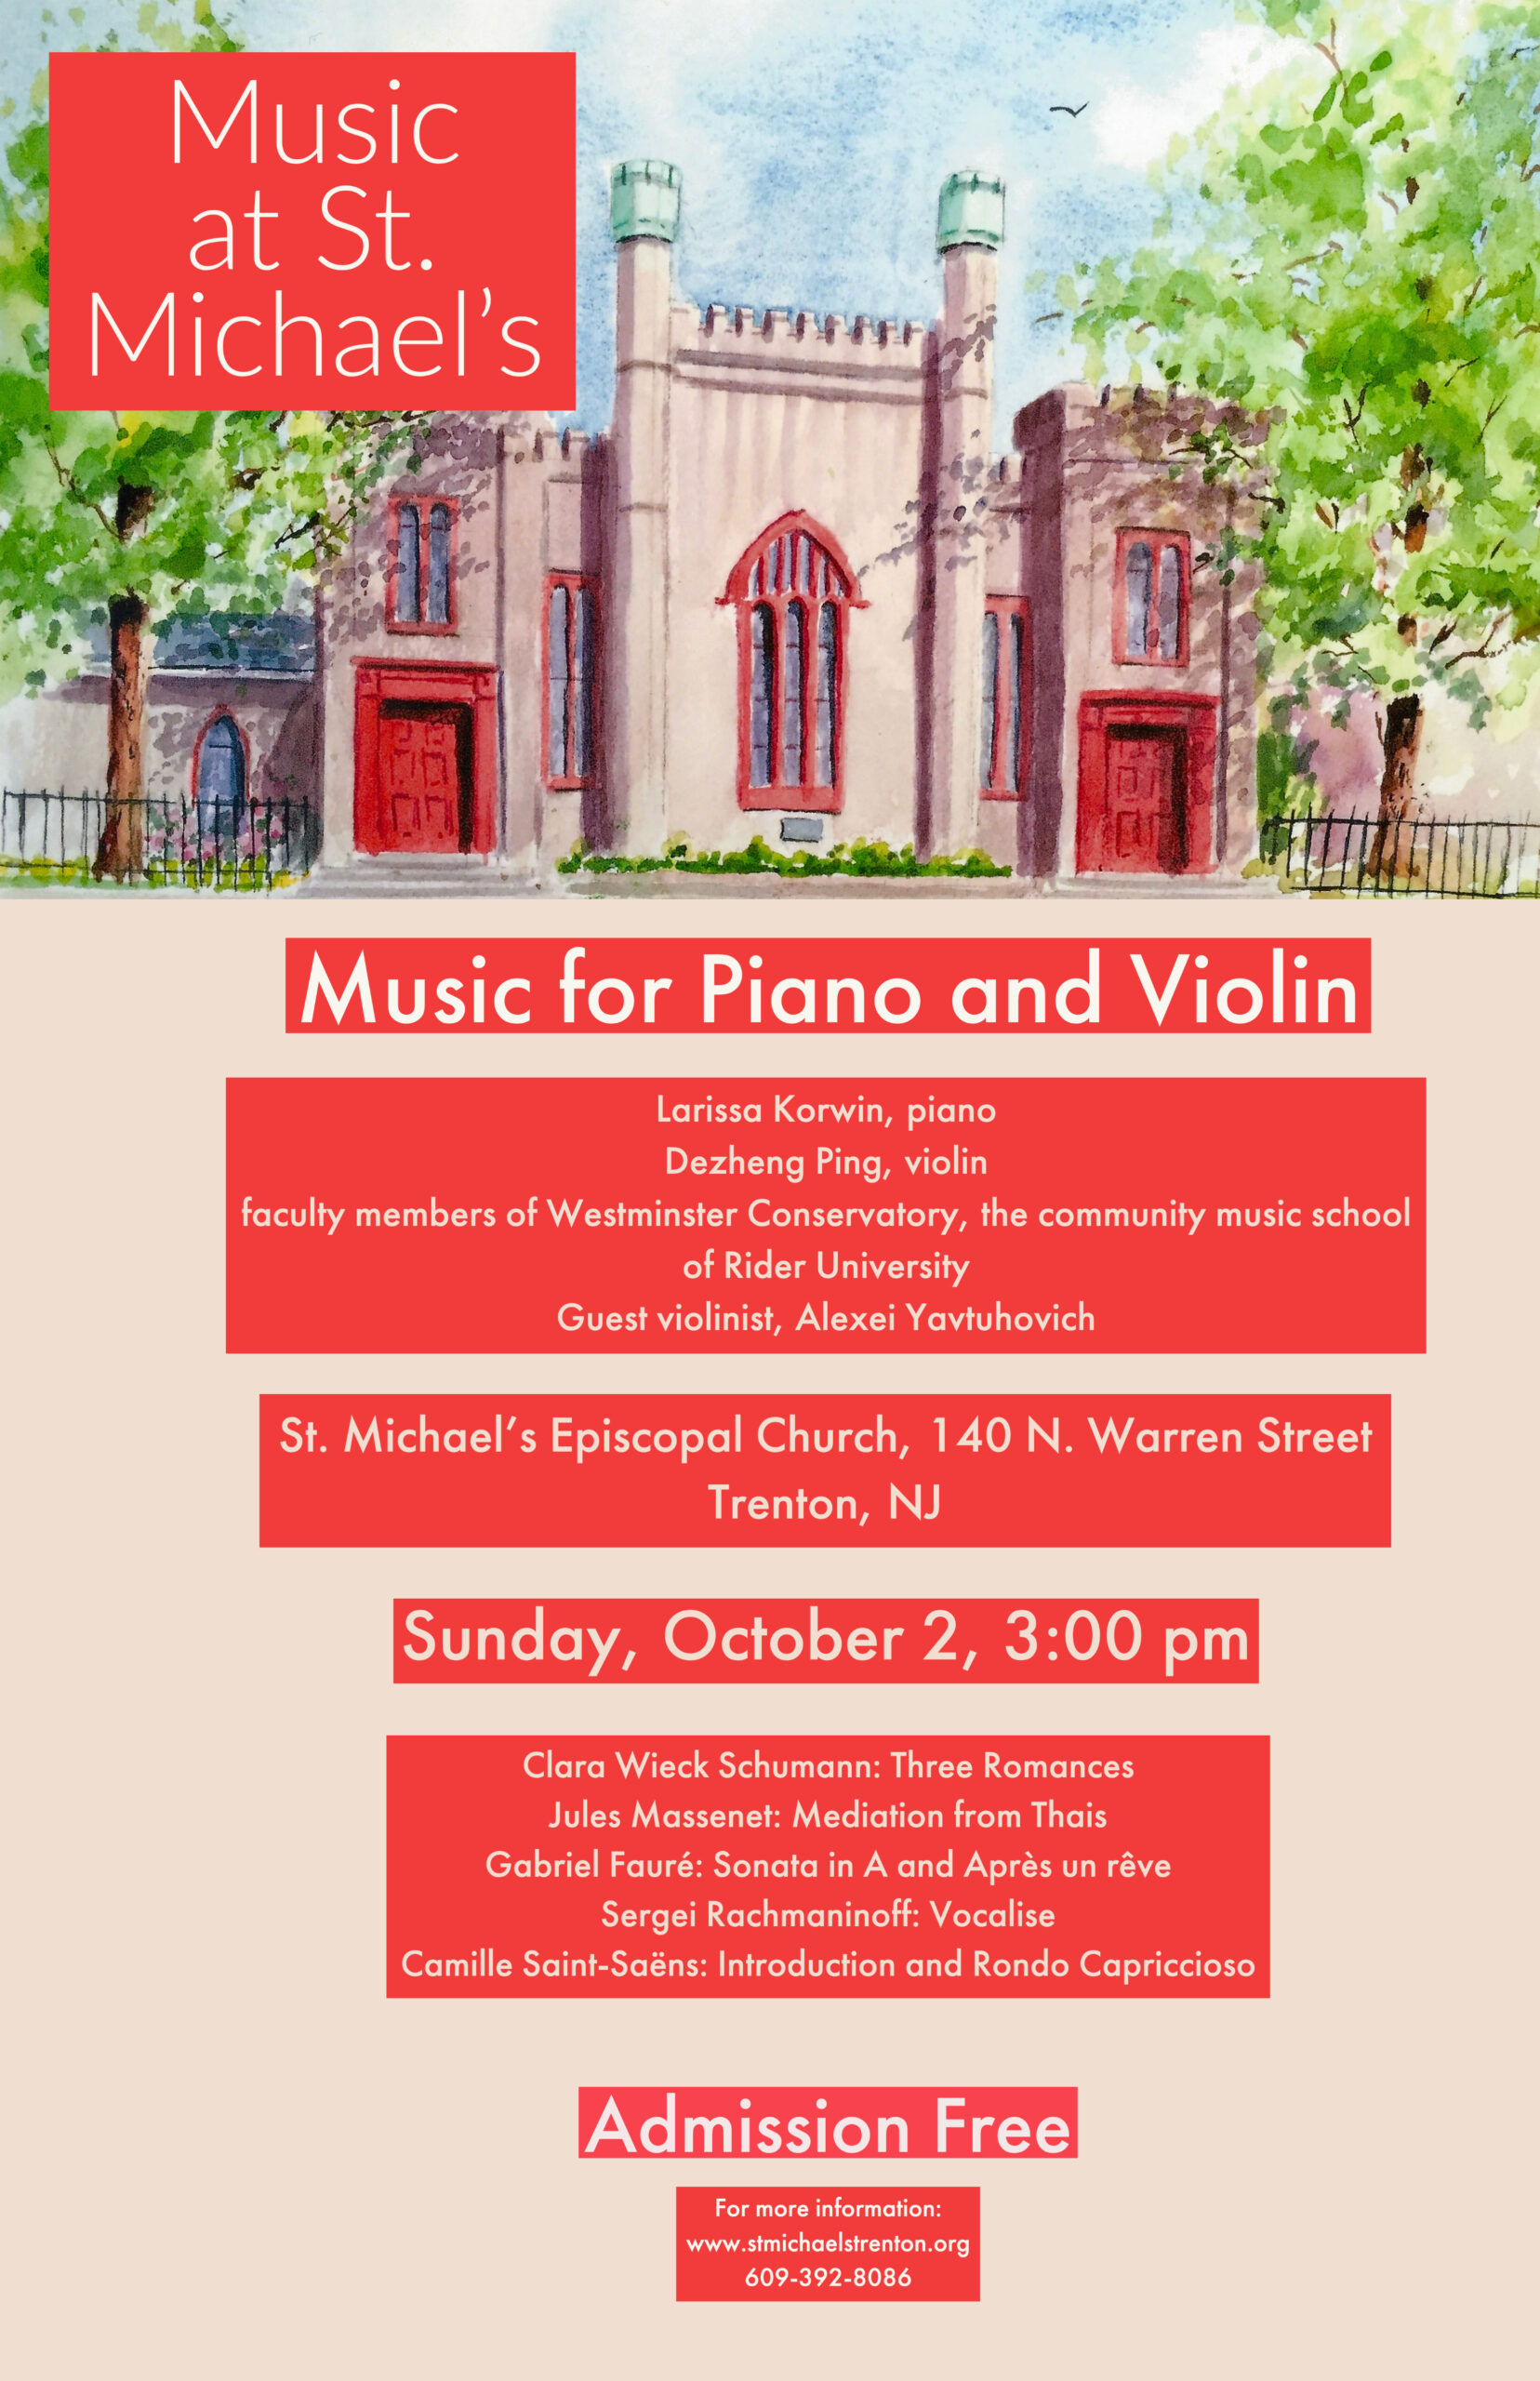 Music at St. Michael's returns Sunday October 2nd at 3:00PM